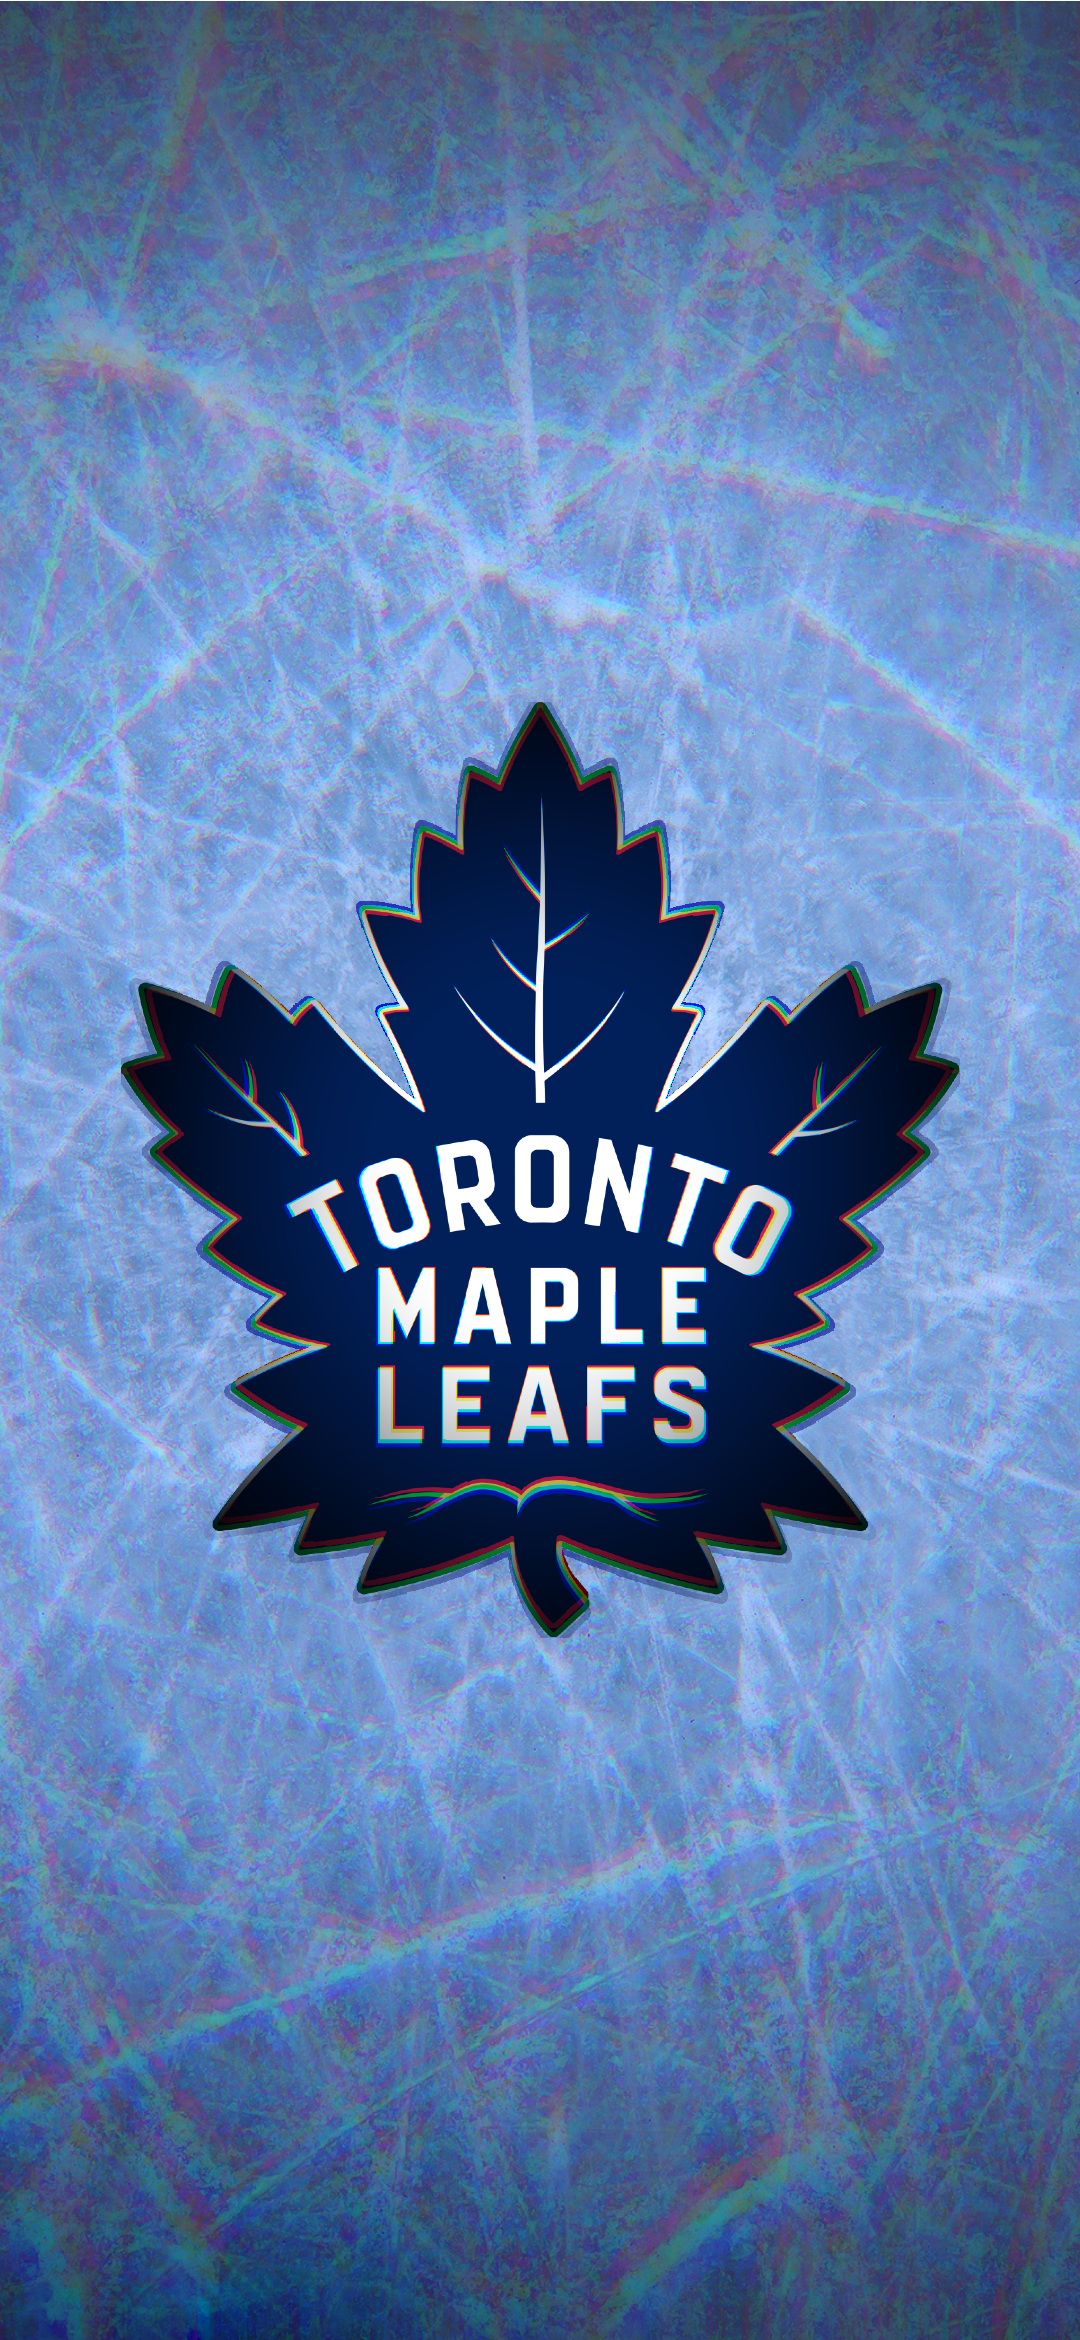 I made a Leafs wallpaper! Let me know what you think!